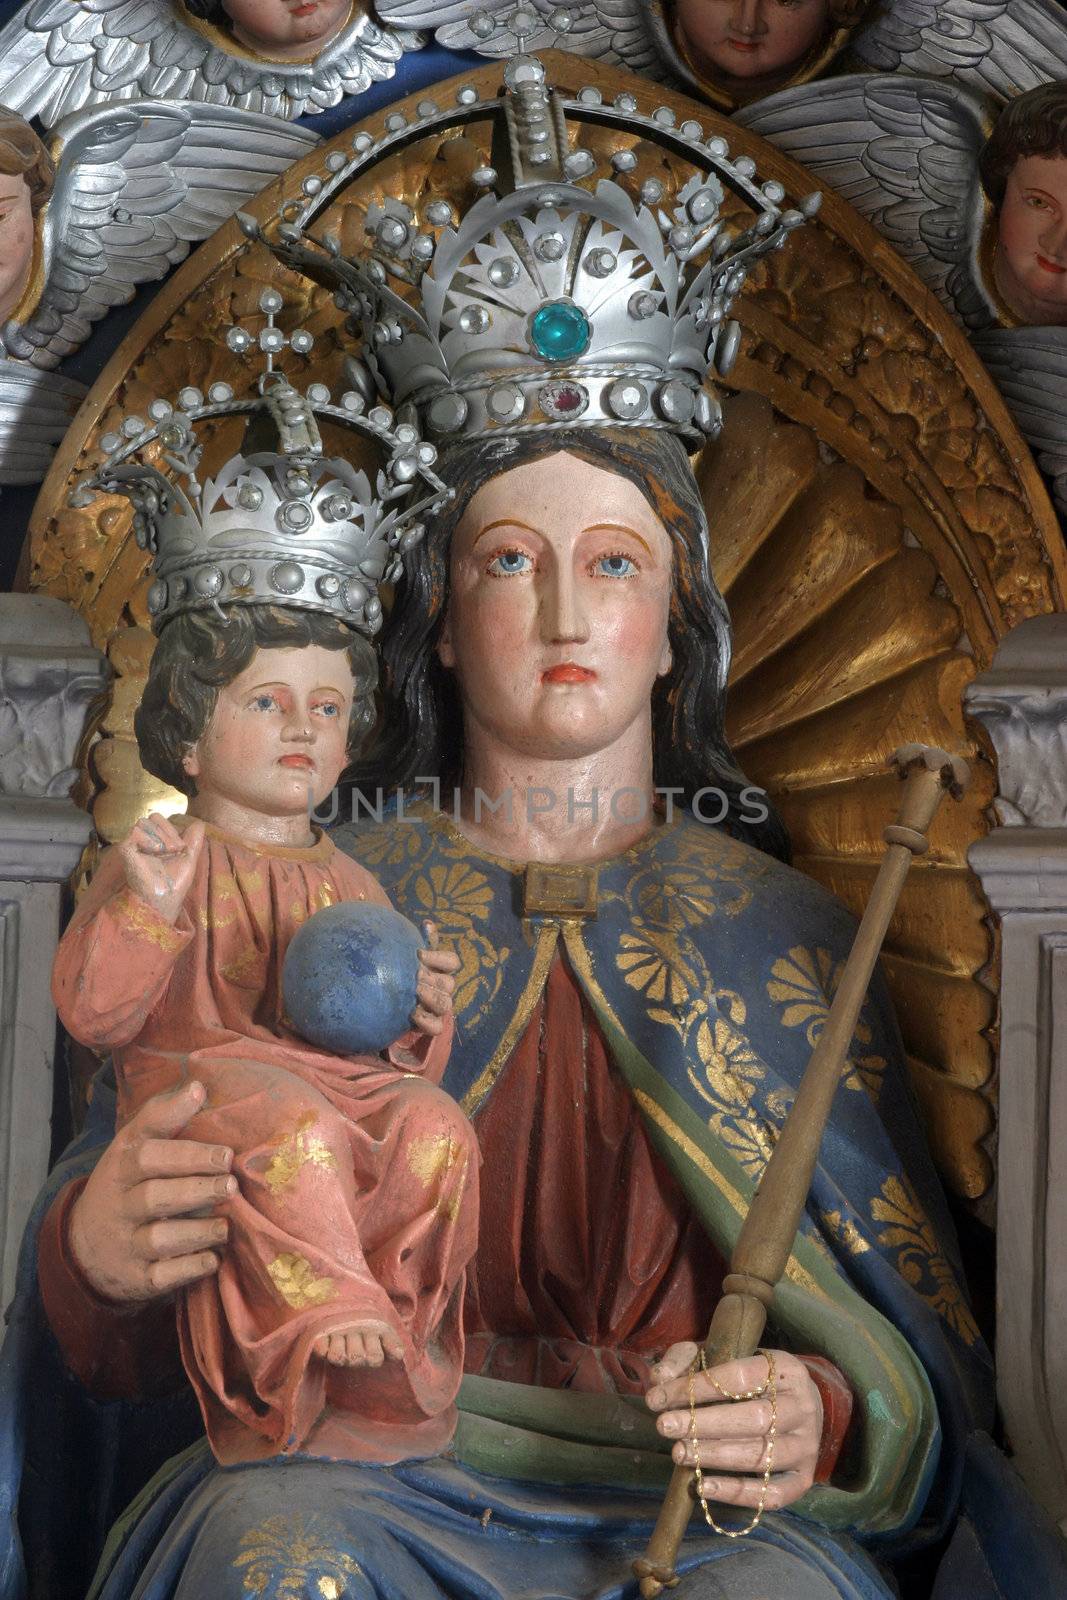 Blessed Virgin Mary with baby Jesus by atlas